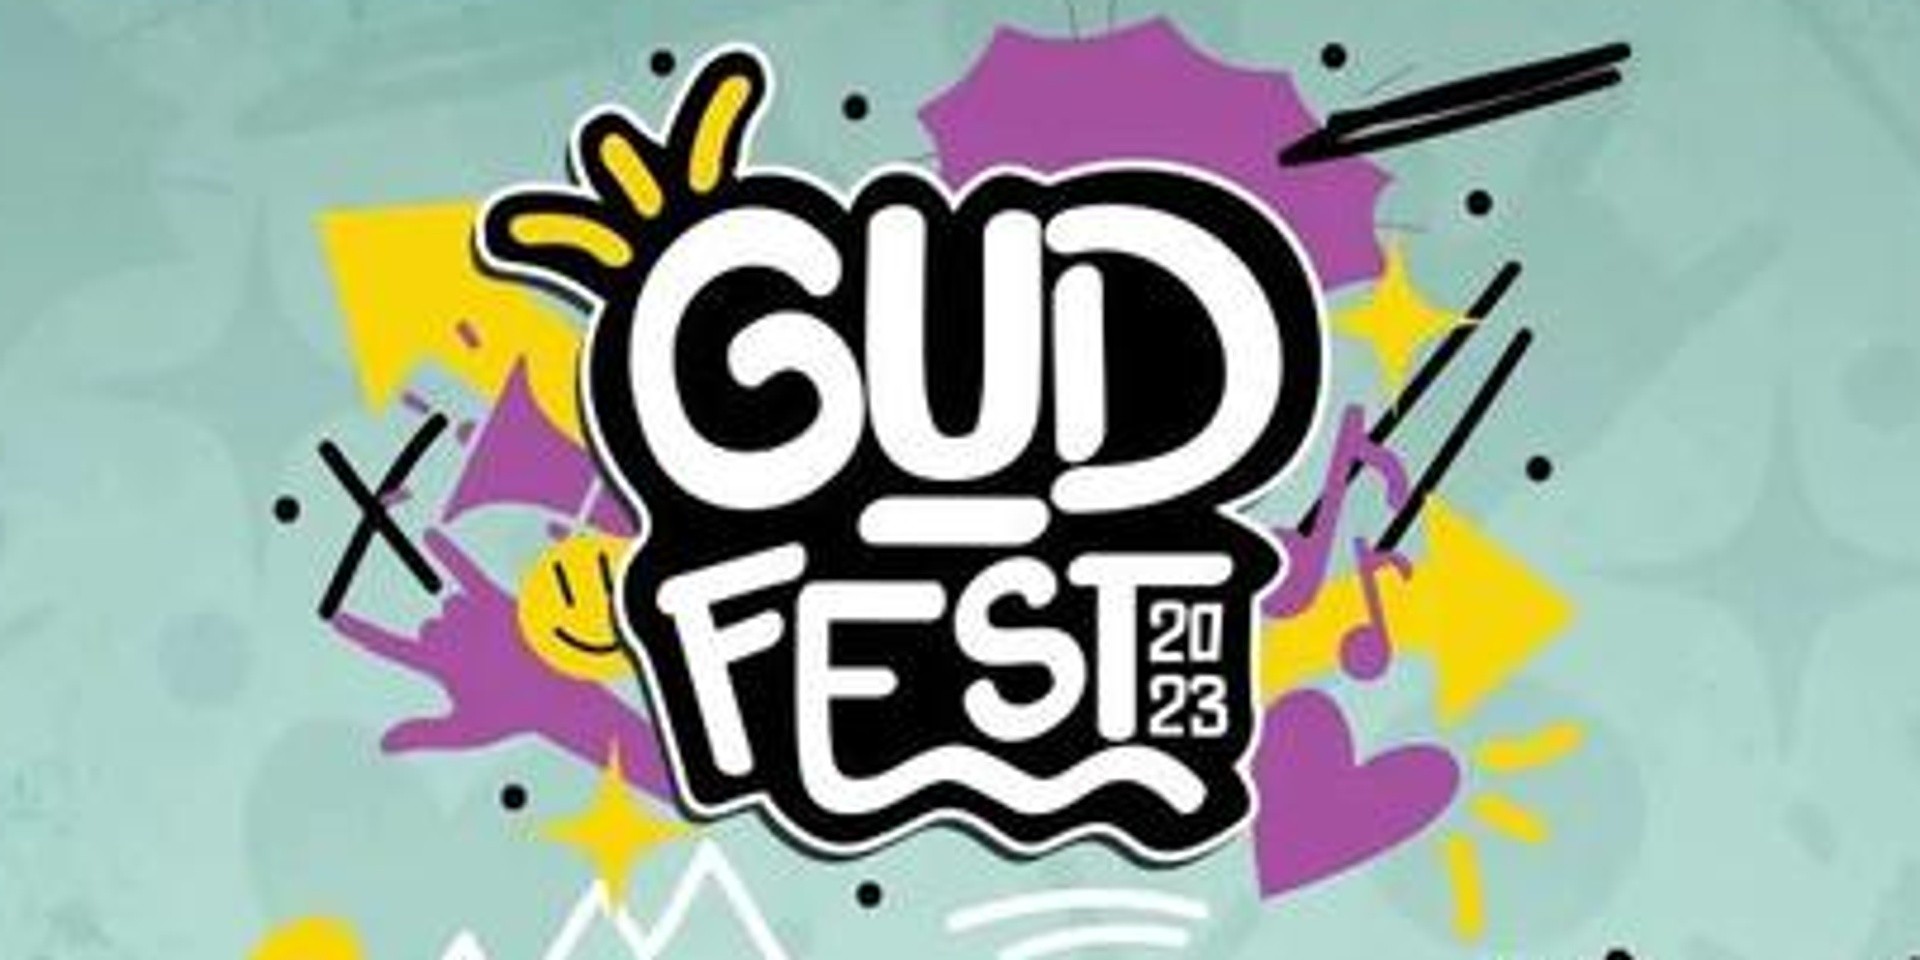 GudFest 2023 has been officially cancelled 